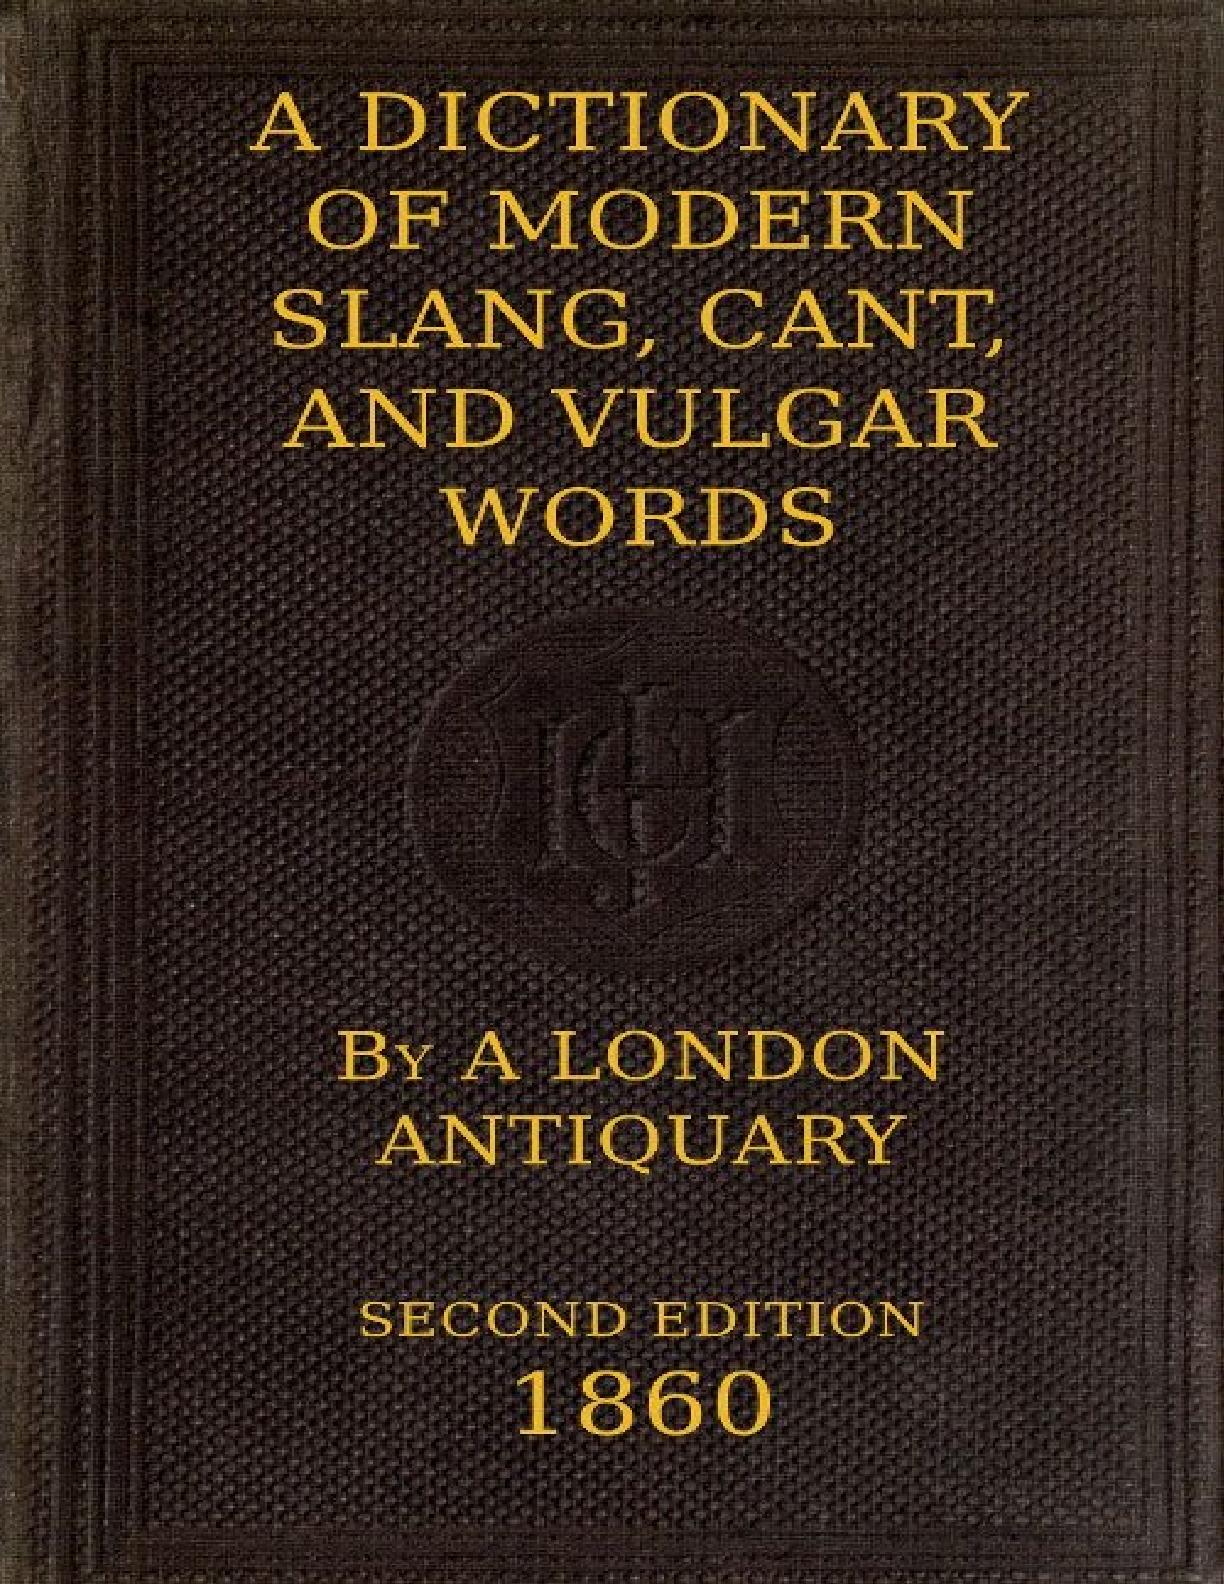 A Dictionary Of Modern Slang, Cant, And Vulgar Words, By